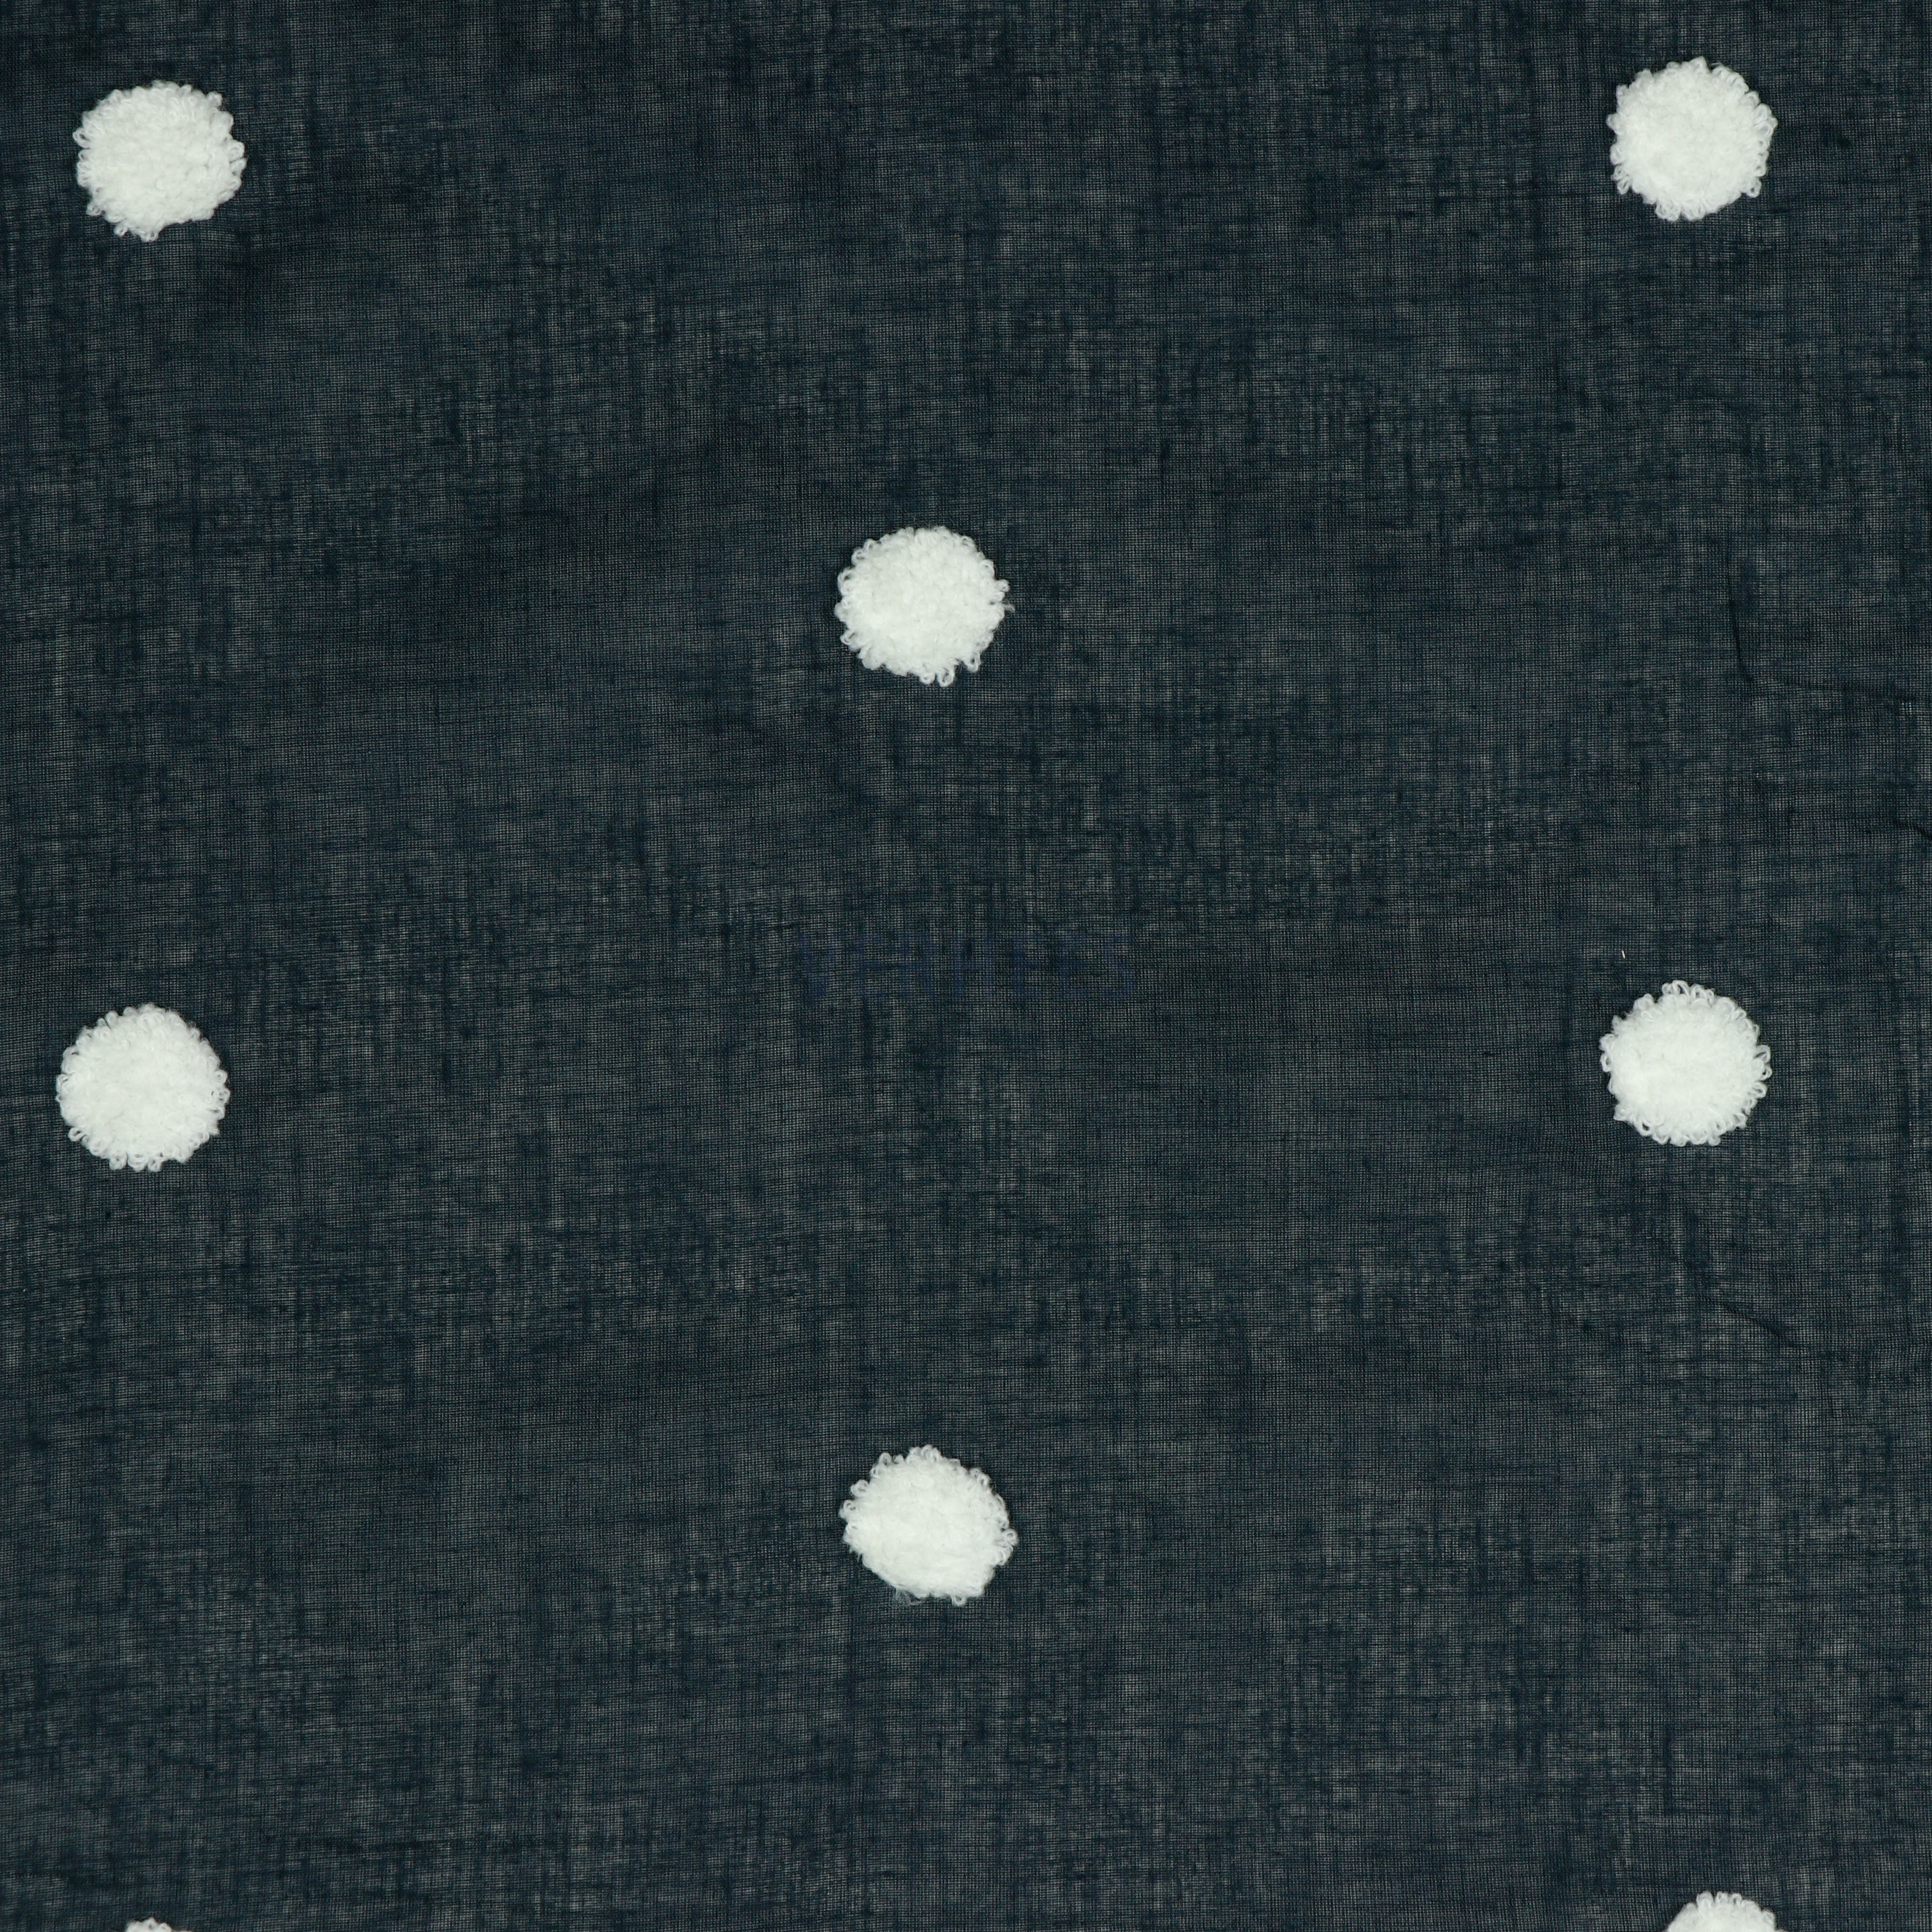 COTTON VOILE DOTS NAVY / WHITE (high resolution)